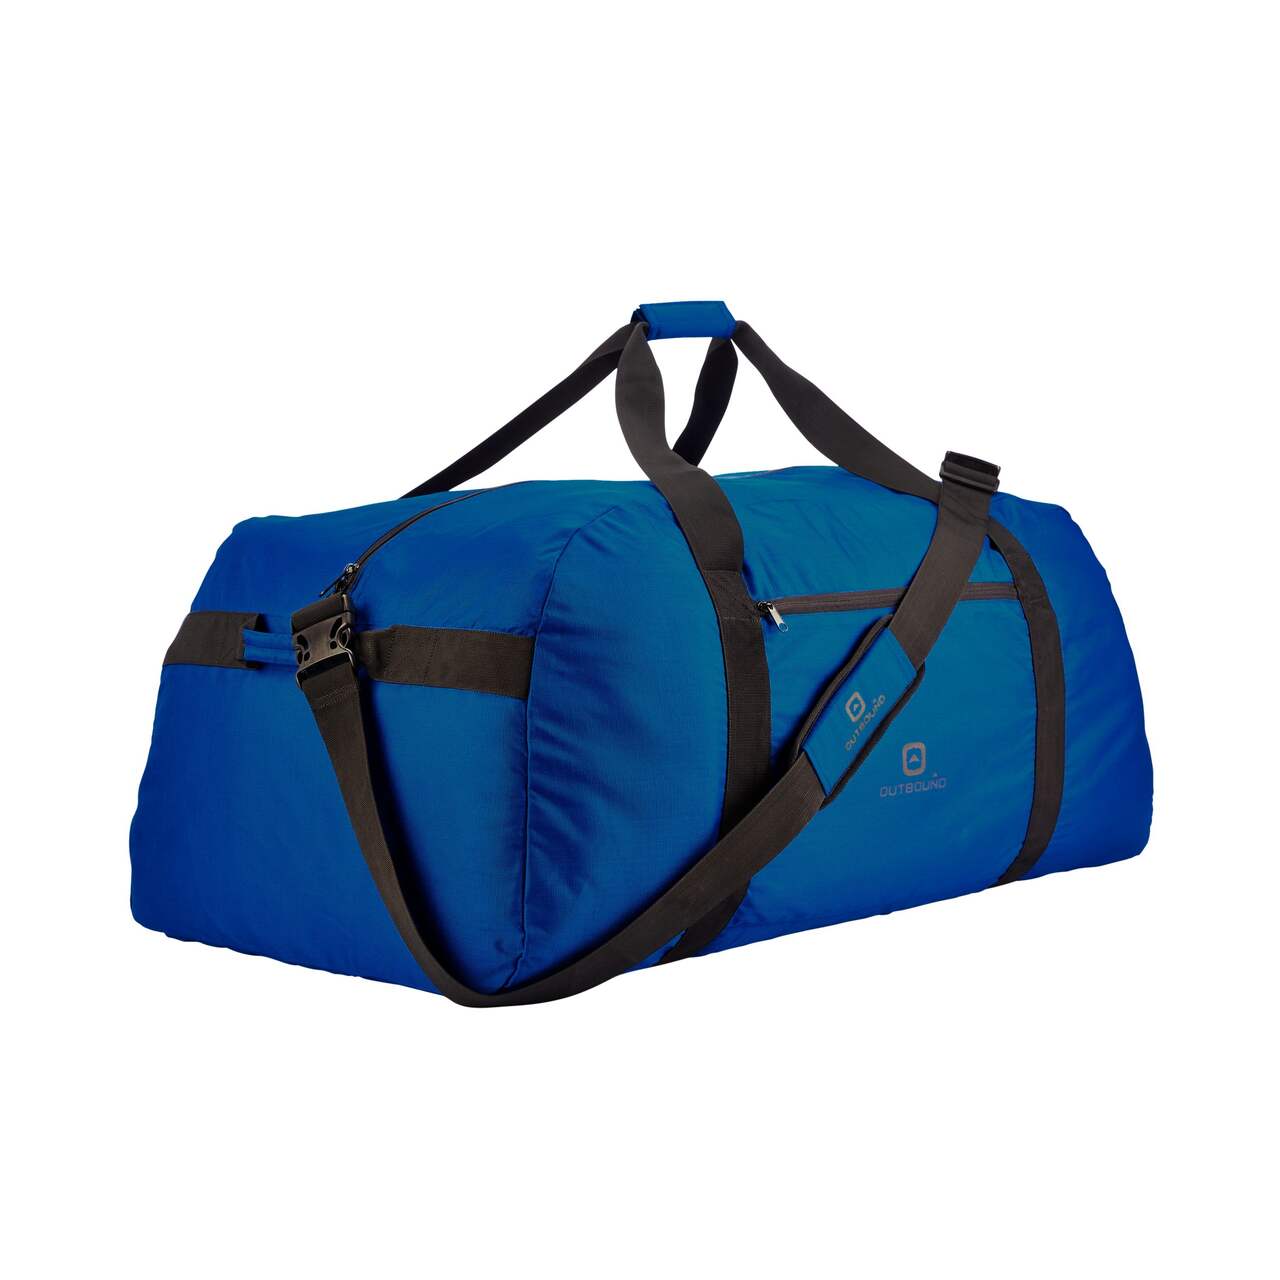 Outbound Self-Packable Weekender Overnight Travel Duffle Bag w